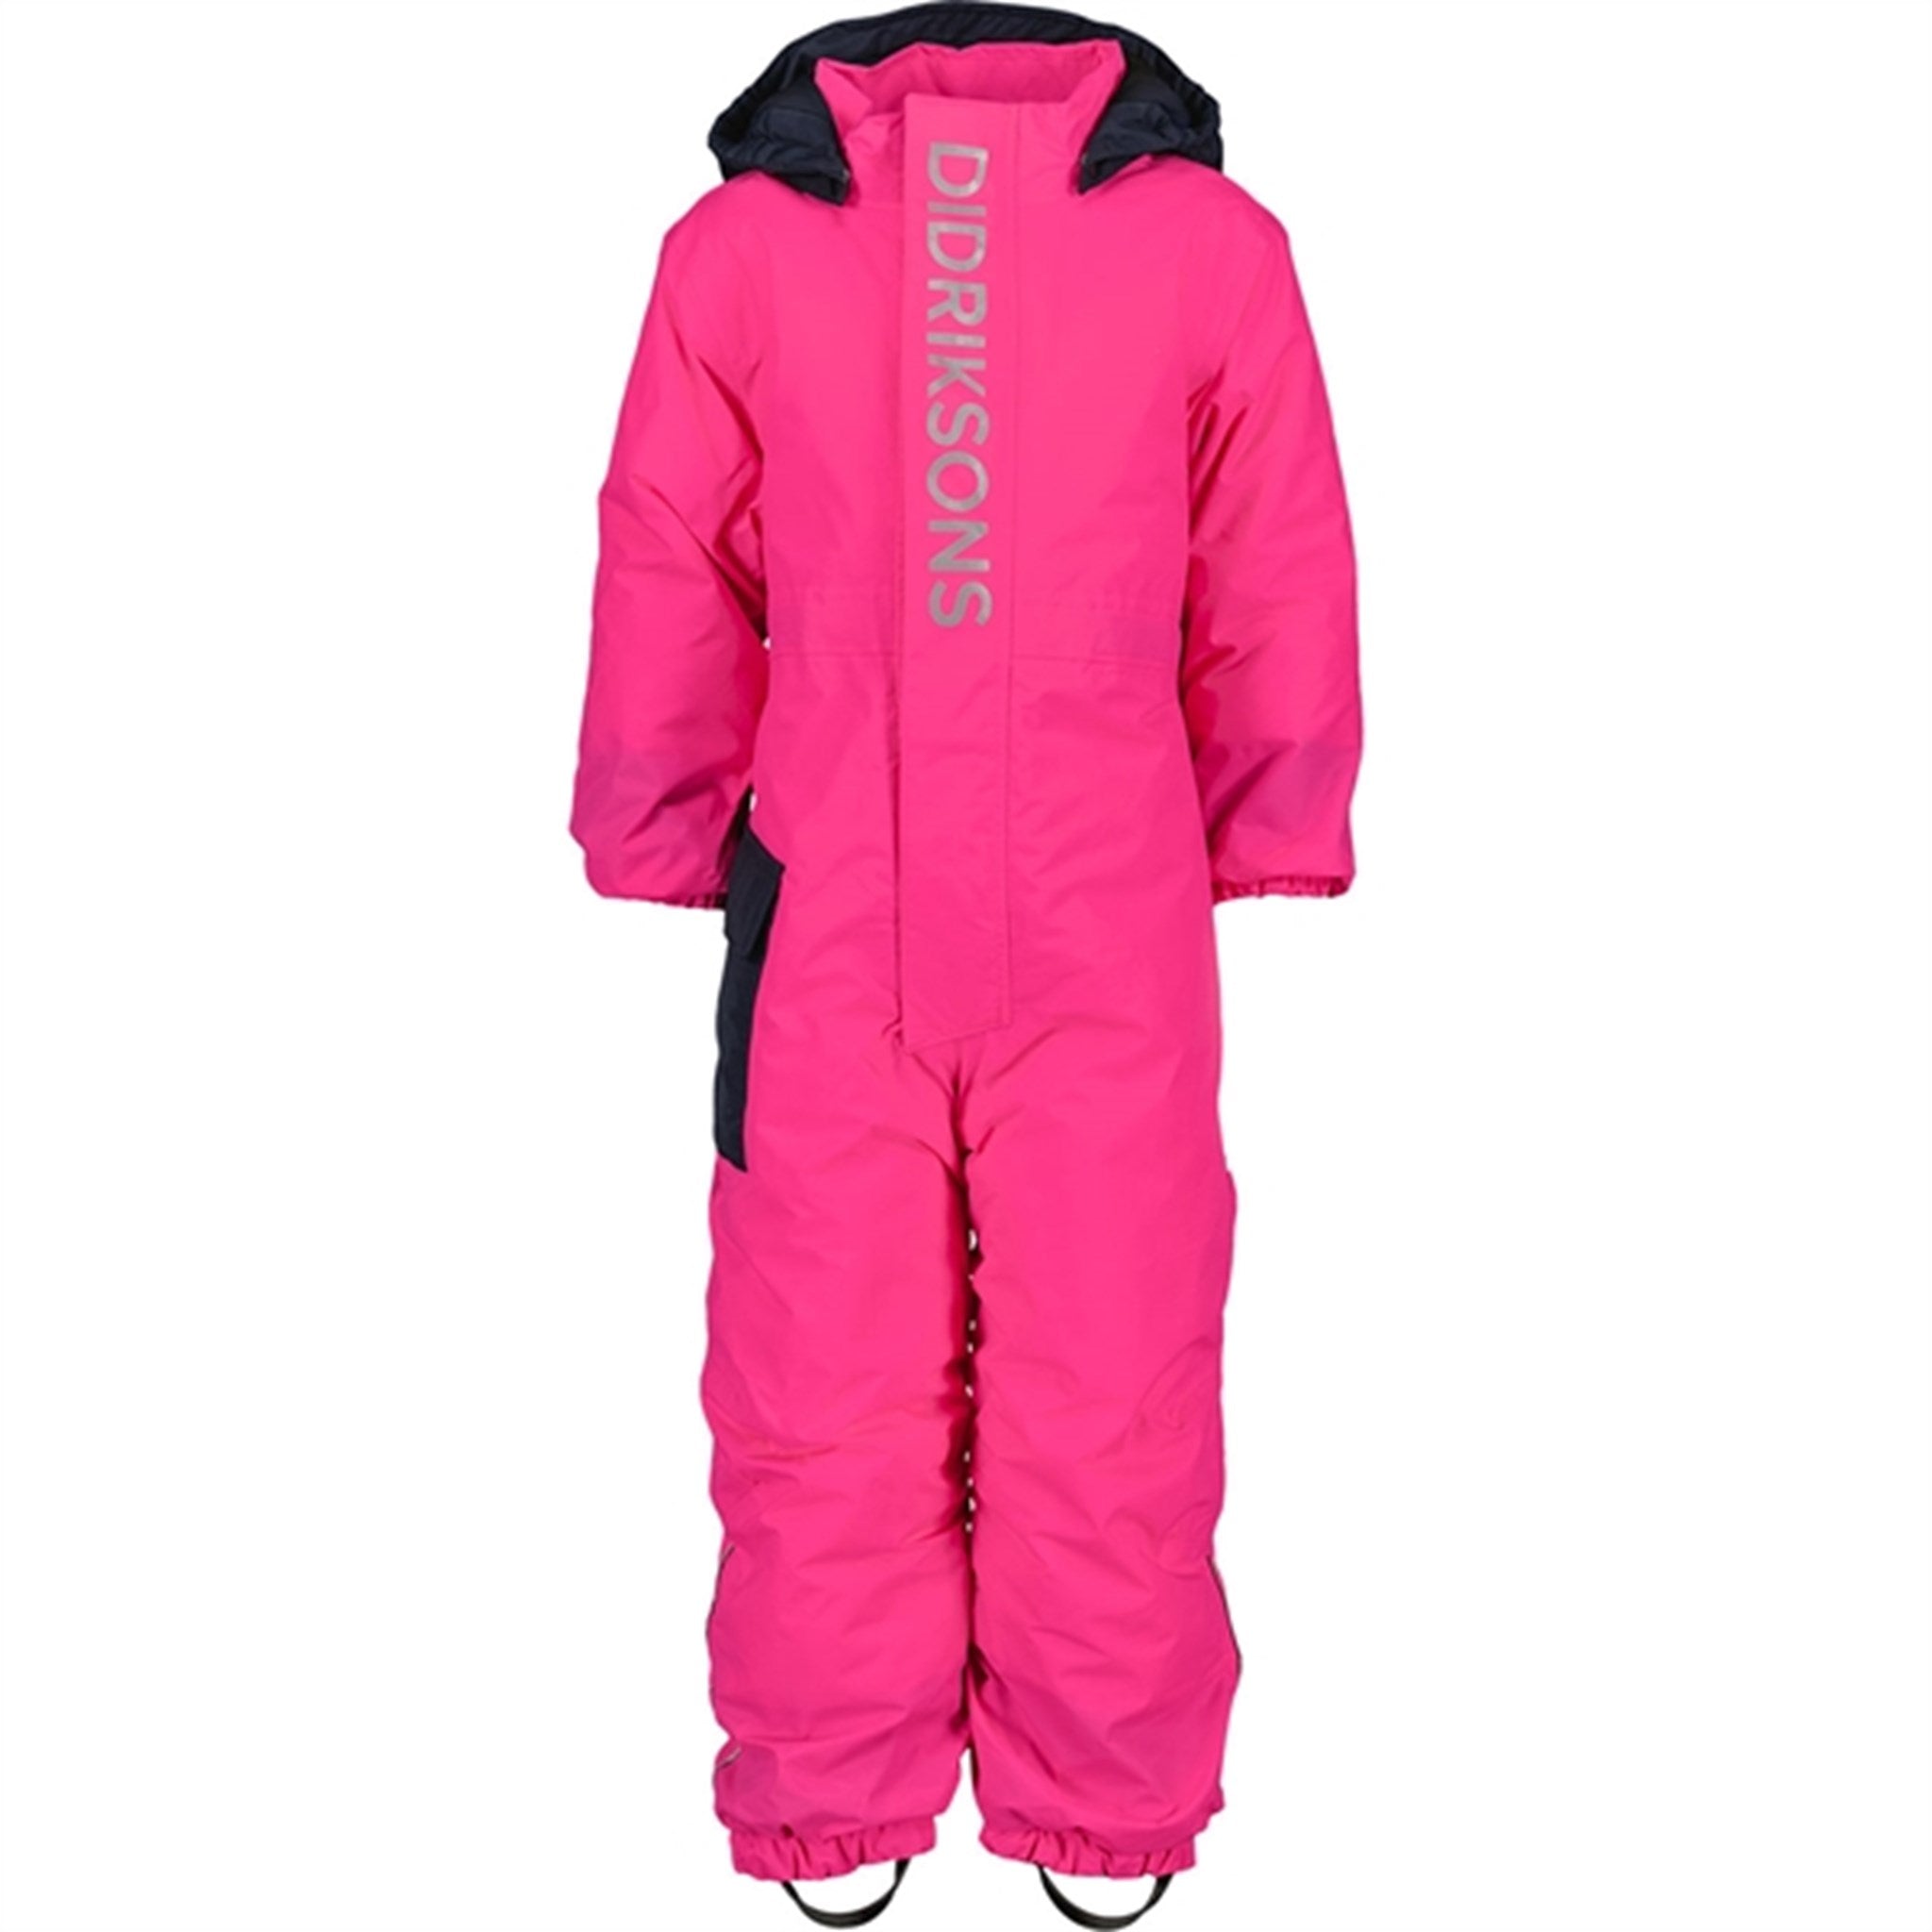 Didriksons True Pink Rio Kids Cover 2 Coverall